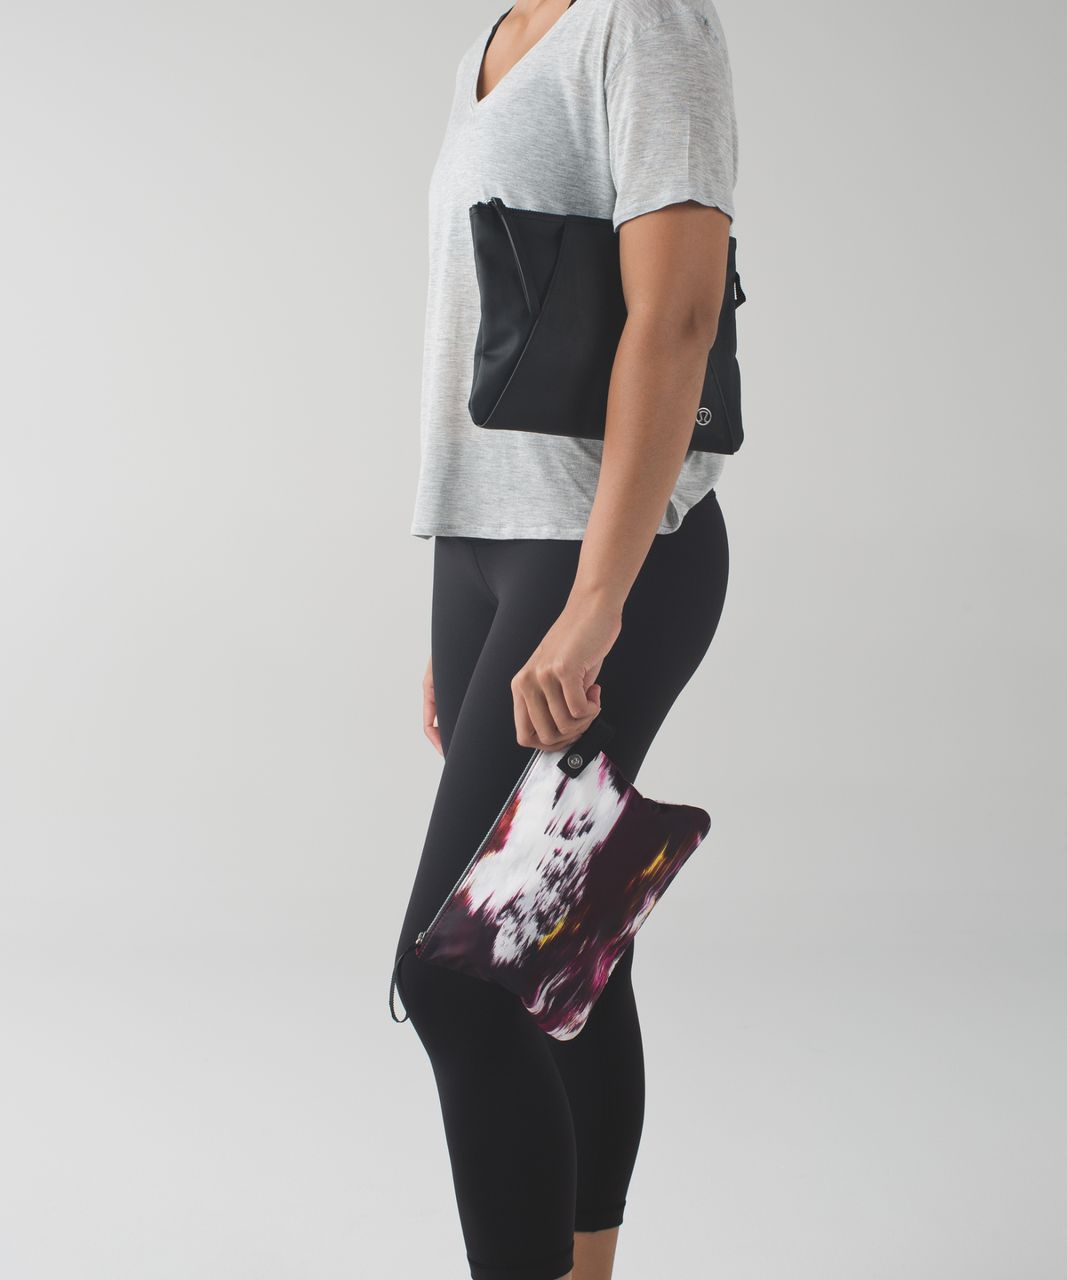 Lululemon In The Present Pouch - Black / Pigment Wind Berry Rumble Multi